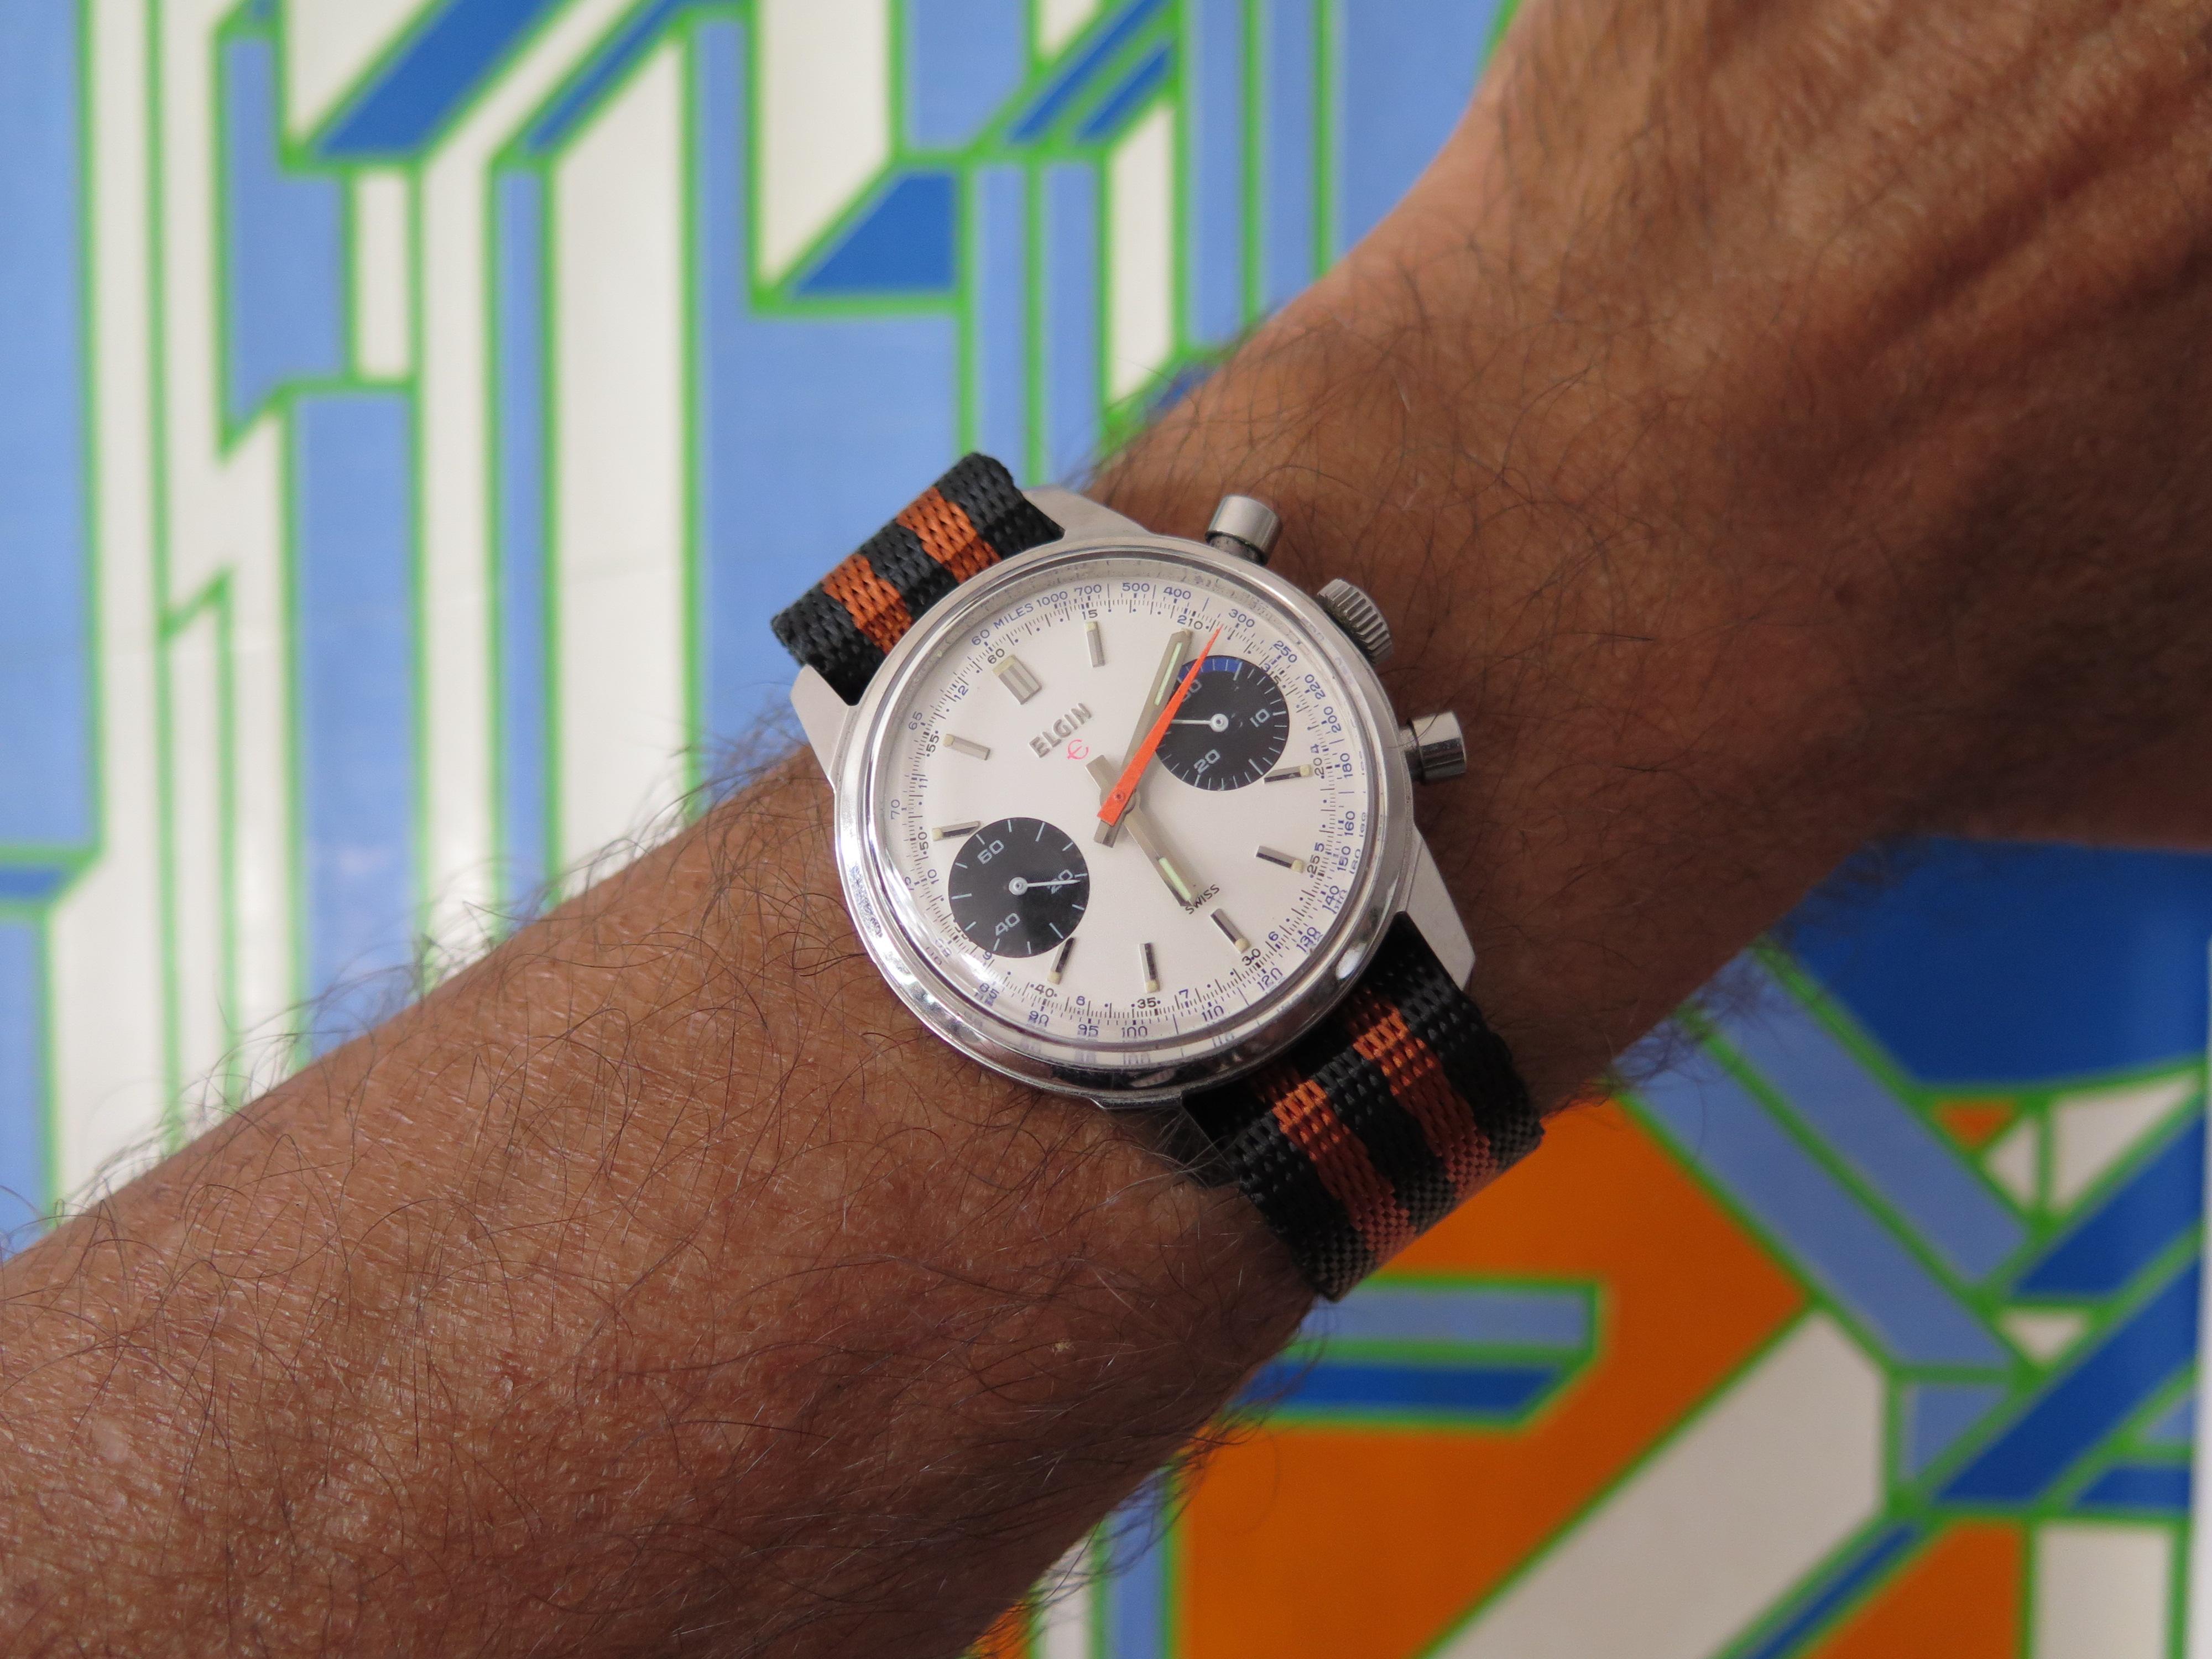 A classic Elgin chronograph ca' 1960's. Featuring a white dial with slightly sunken subsidiary black dials, orange second hand. Measuring 36mm diameter without crown and approx. 43 mm lug to lug. This watch has a solid feel on the wrist. Powered by